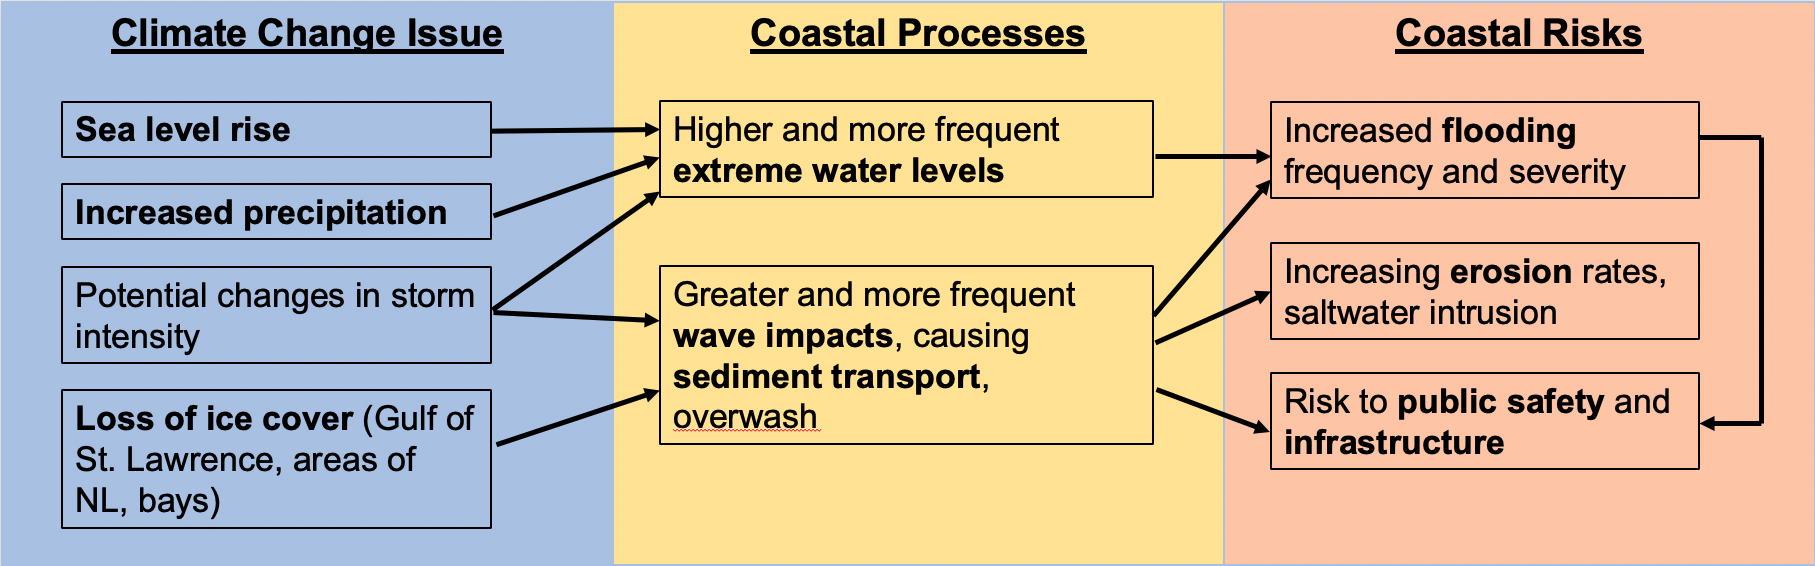 An infographic showing different climate change issues (sea level rise, increased precipitation, changes in storm intensity, and loss of ice cover), their influences on coastal processes (extreme water levels, wave impacts, and sediment transport), and the subsequent coastal risks caused by these impacts (increased flooding and erosion, risk to public safety and infrastructure).